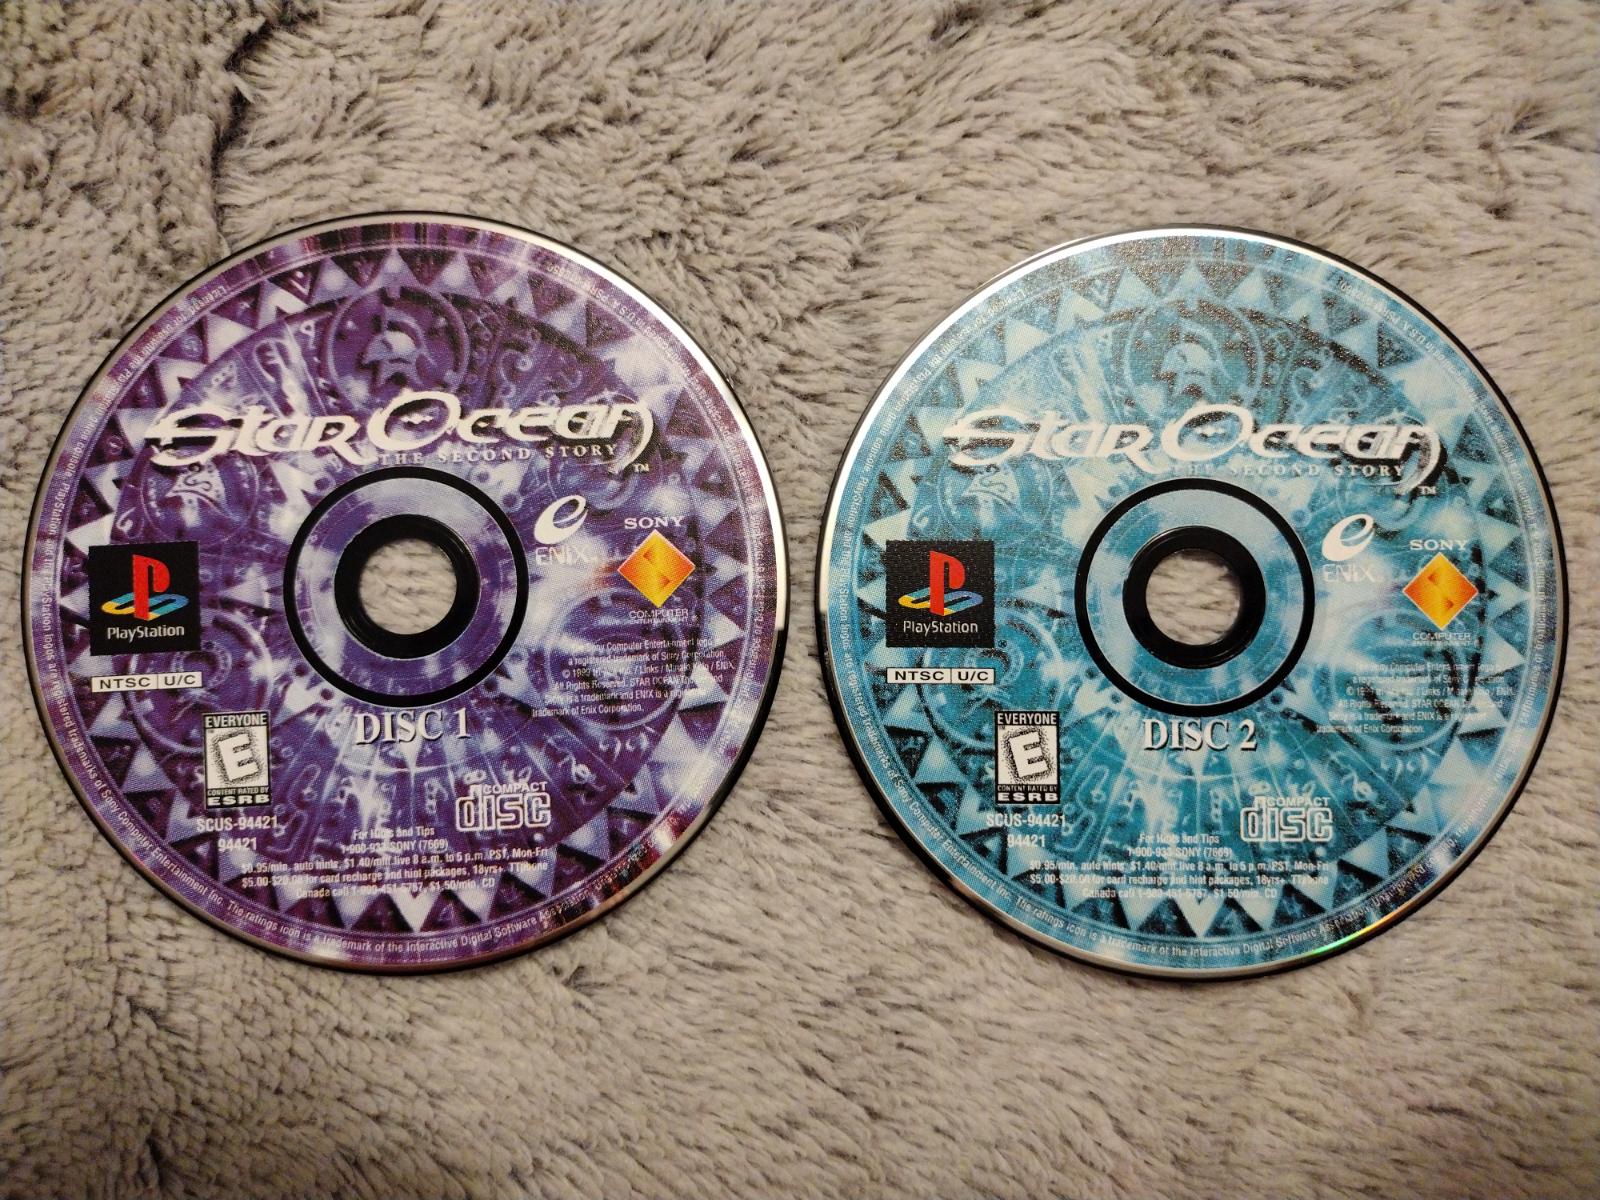 Star Ocean: The Second Story (Sony PlayStation 1, 1999) for sale